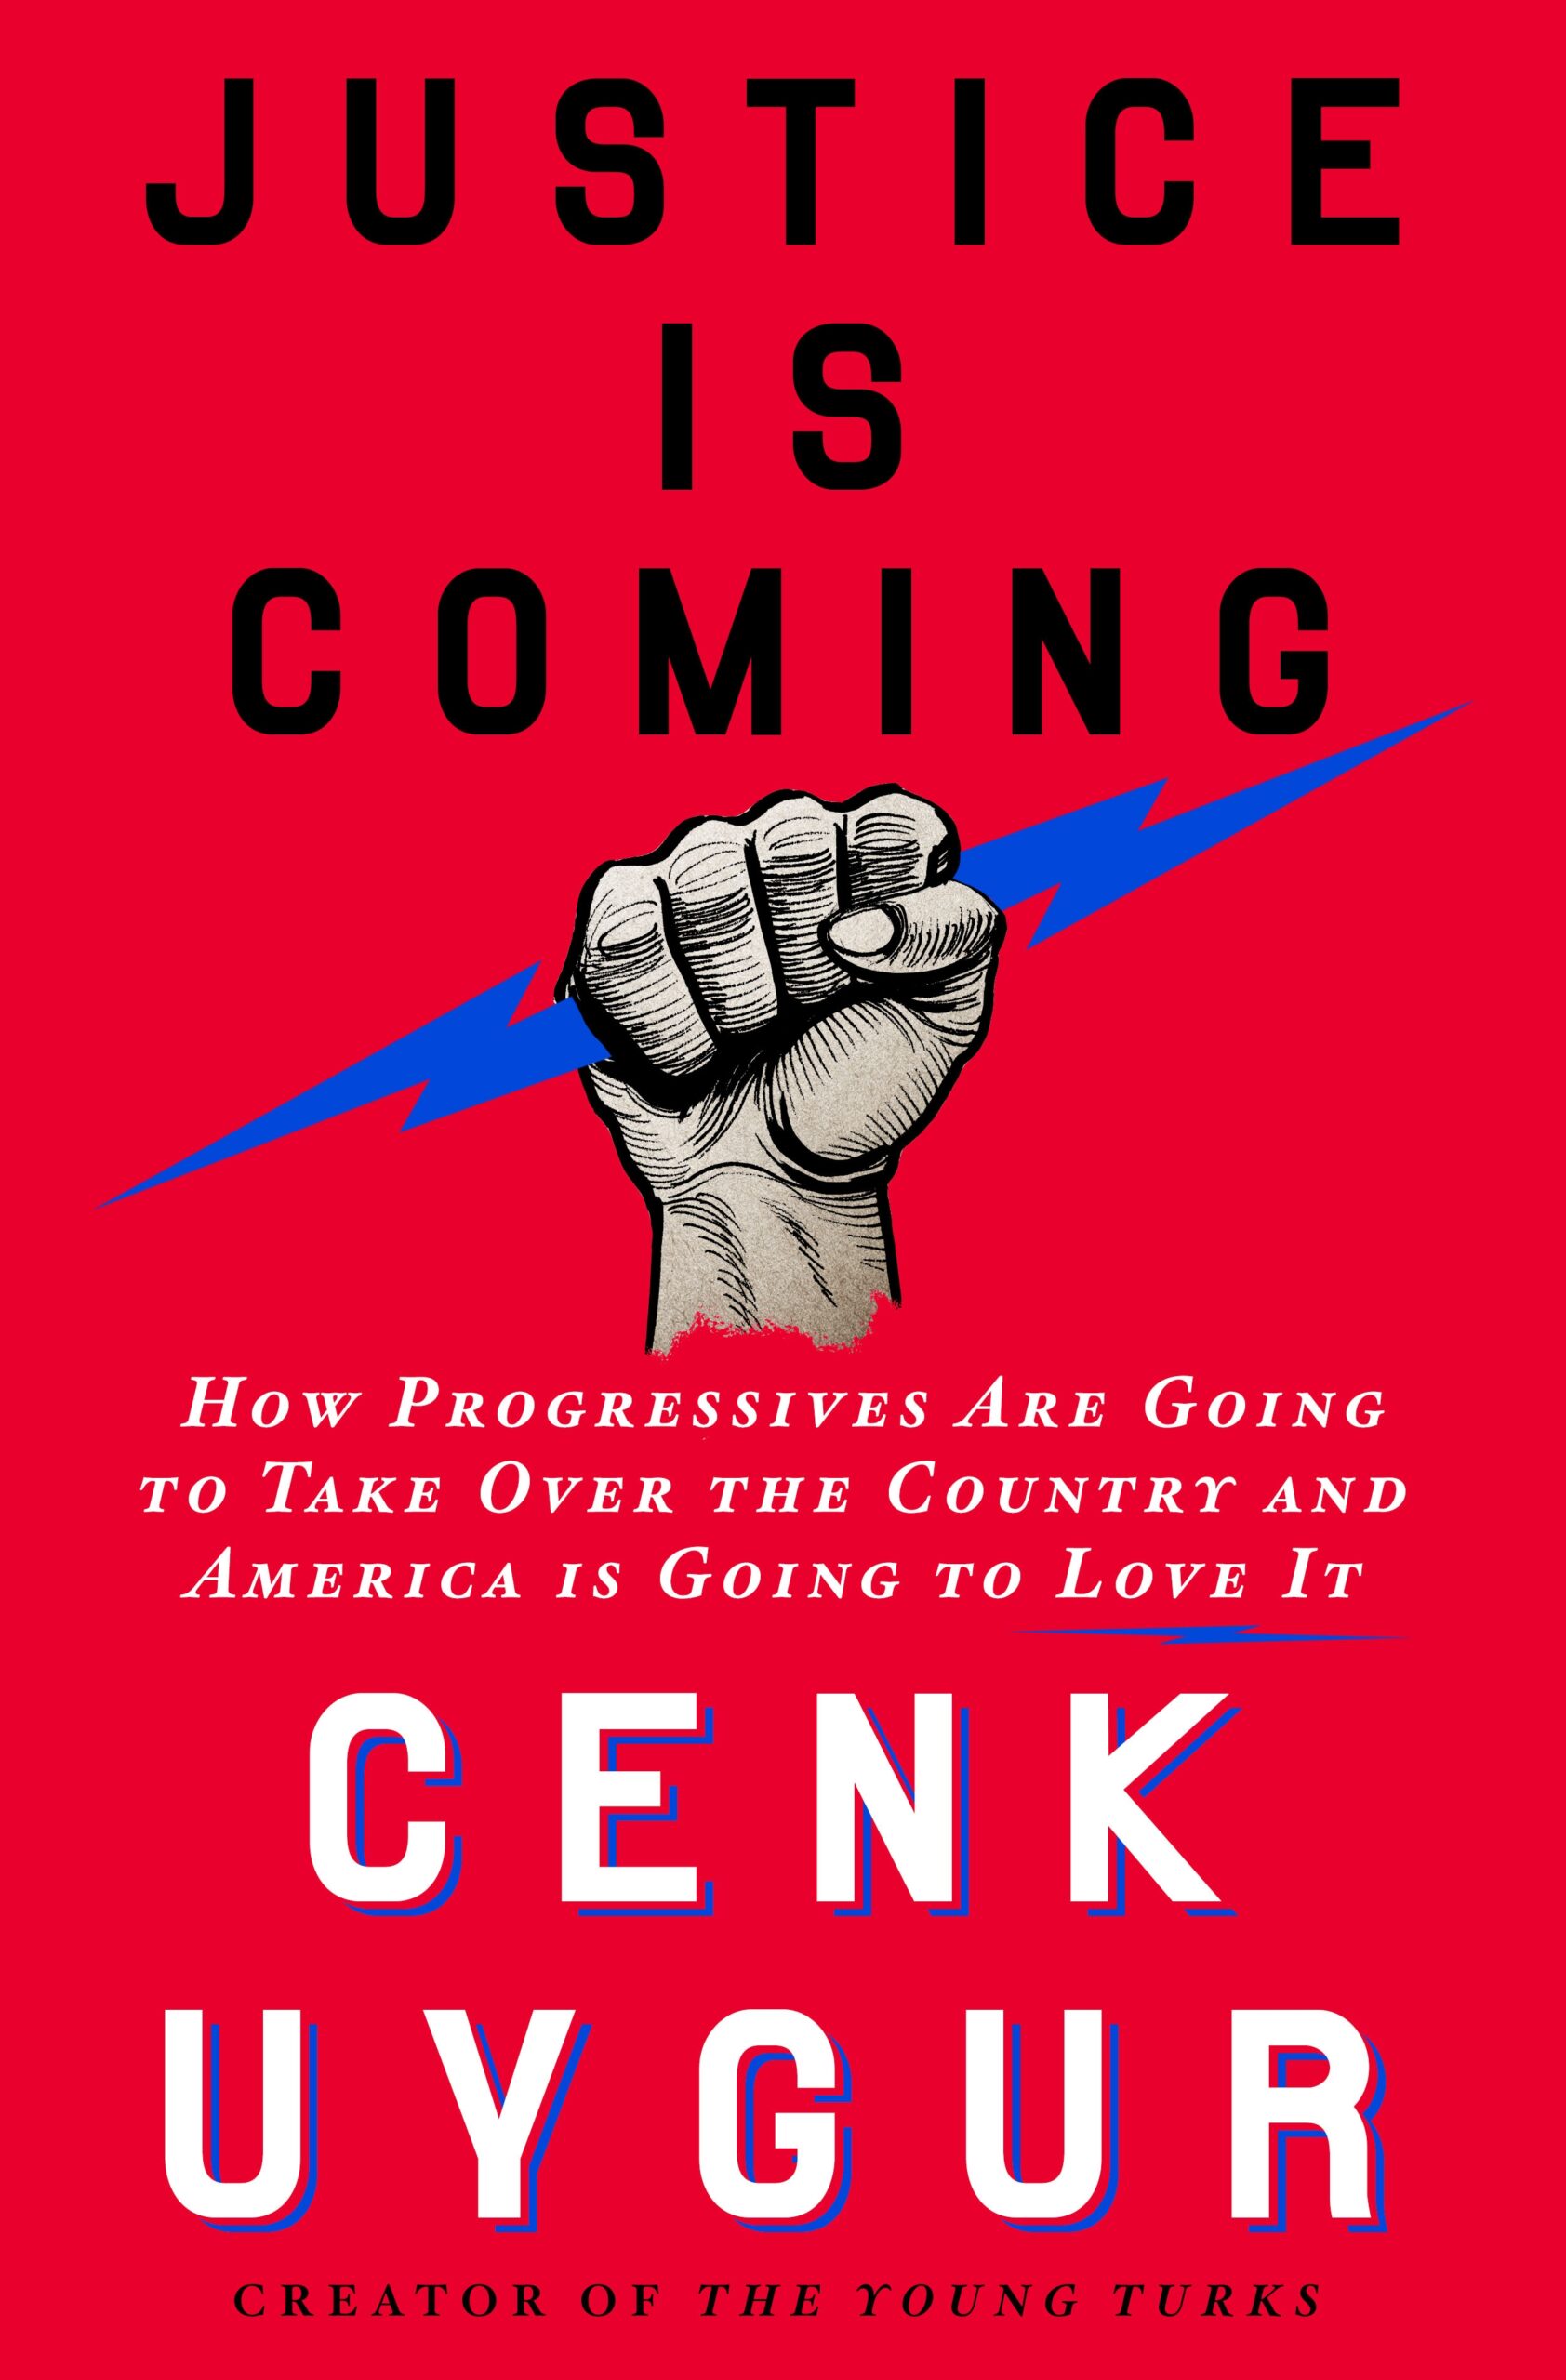 Book Launch: Justice is Coming by Cenk Uygur with Colby Hall